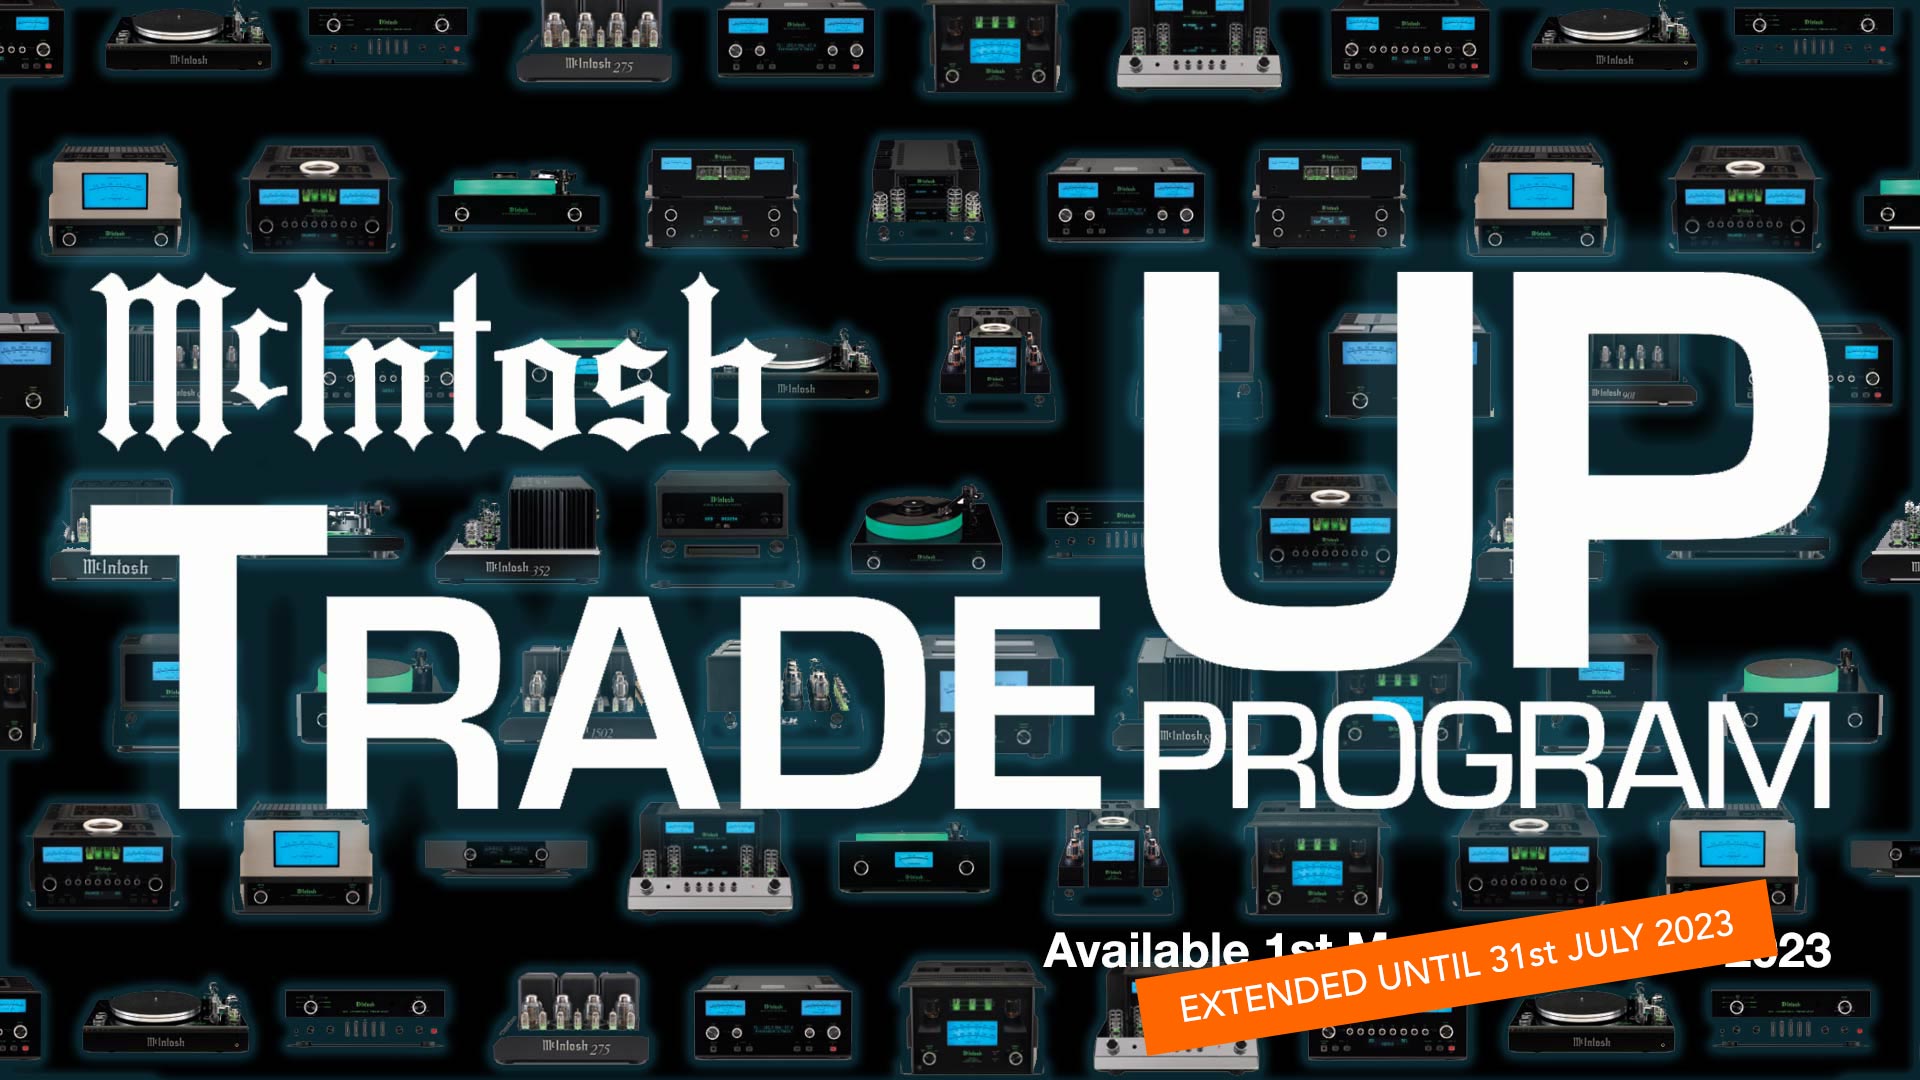 McIntosh Trade UP Program | Available at Unilet Sound & Vision